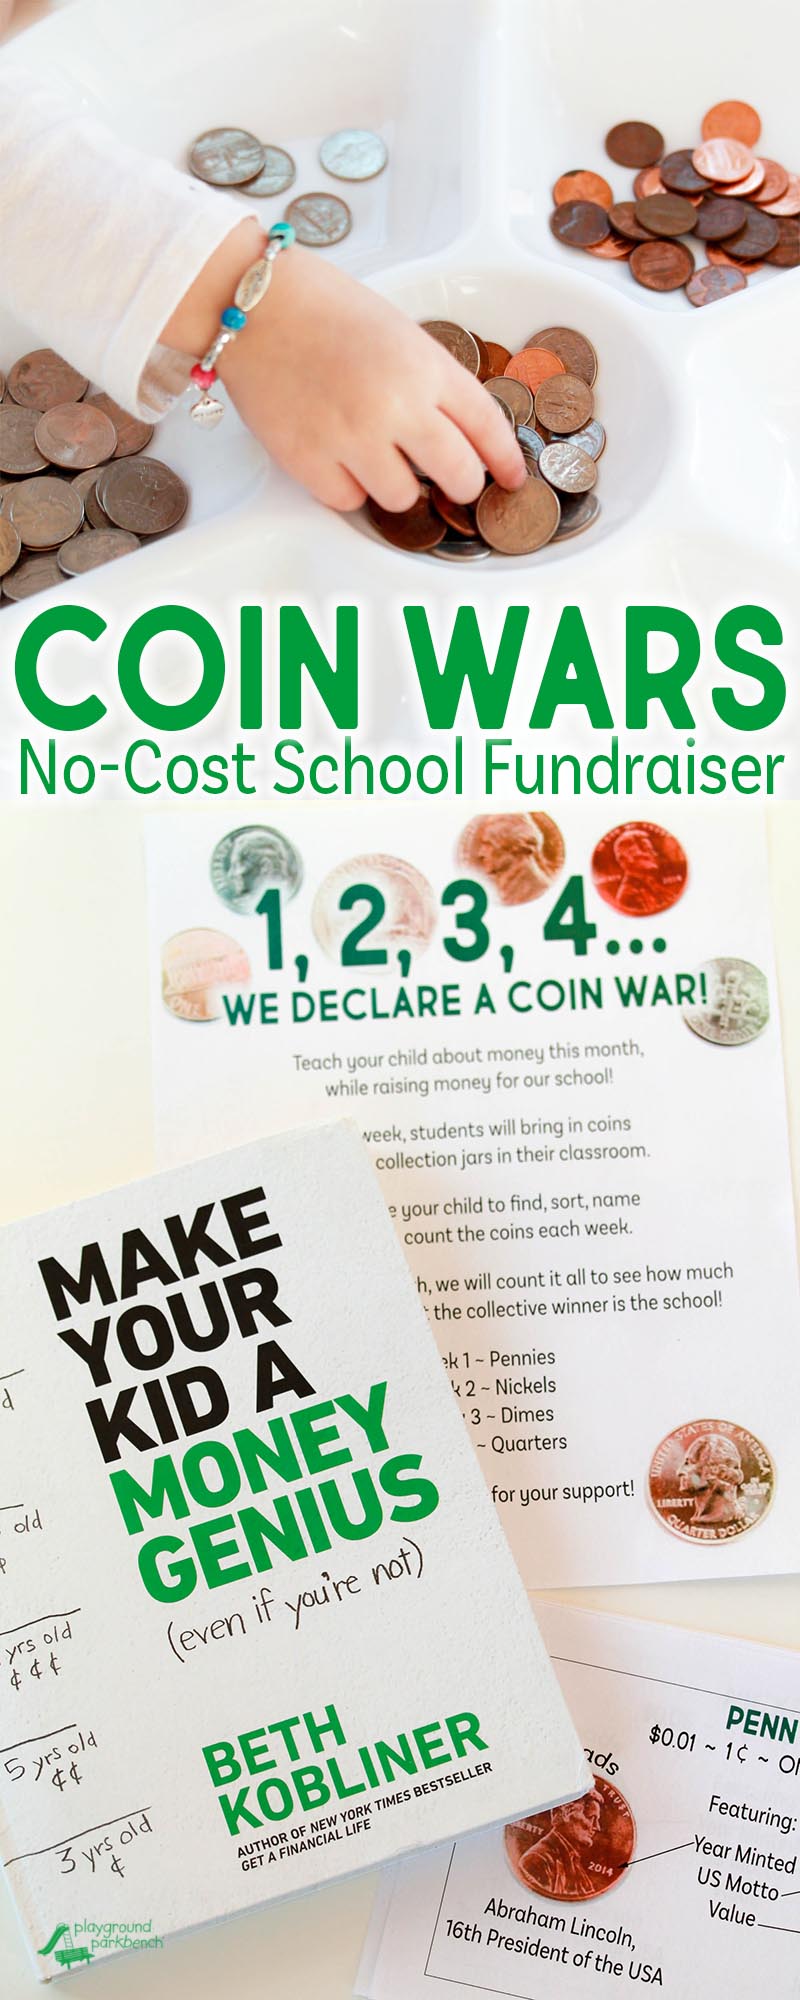 You don't have to be a financial expert to make your kid a MoneyGenius! Grab your School Fundraiser bundle to launch your own Coin War, inspired by the preschool lessons recommended by Make Your Kid a Money Genius (Even If You're Not). This awesome parenting guide from @BethKobliner will give you tools and guidance to begin teaching children as young as preschoolers about money, savings, hard work and how to make good financial decisions. Each chapter addresses a different financial topic, with segments for each age group, from preschool through college. | AD | Family Finances | Financial Savvy | STEM for Preschool | Math for Kids | Printables |